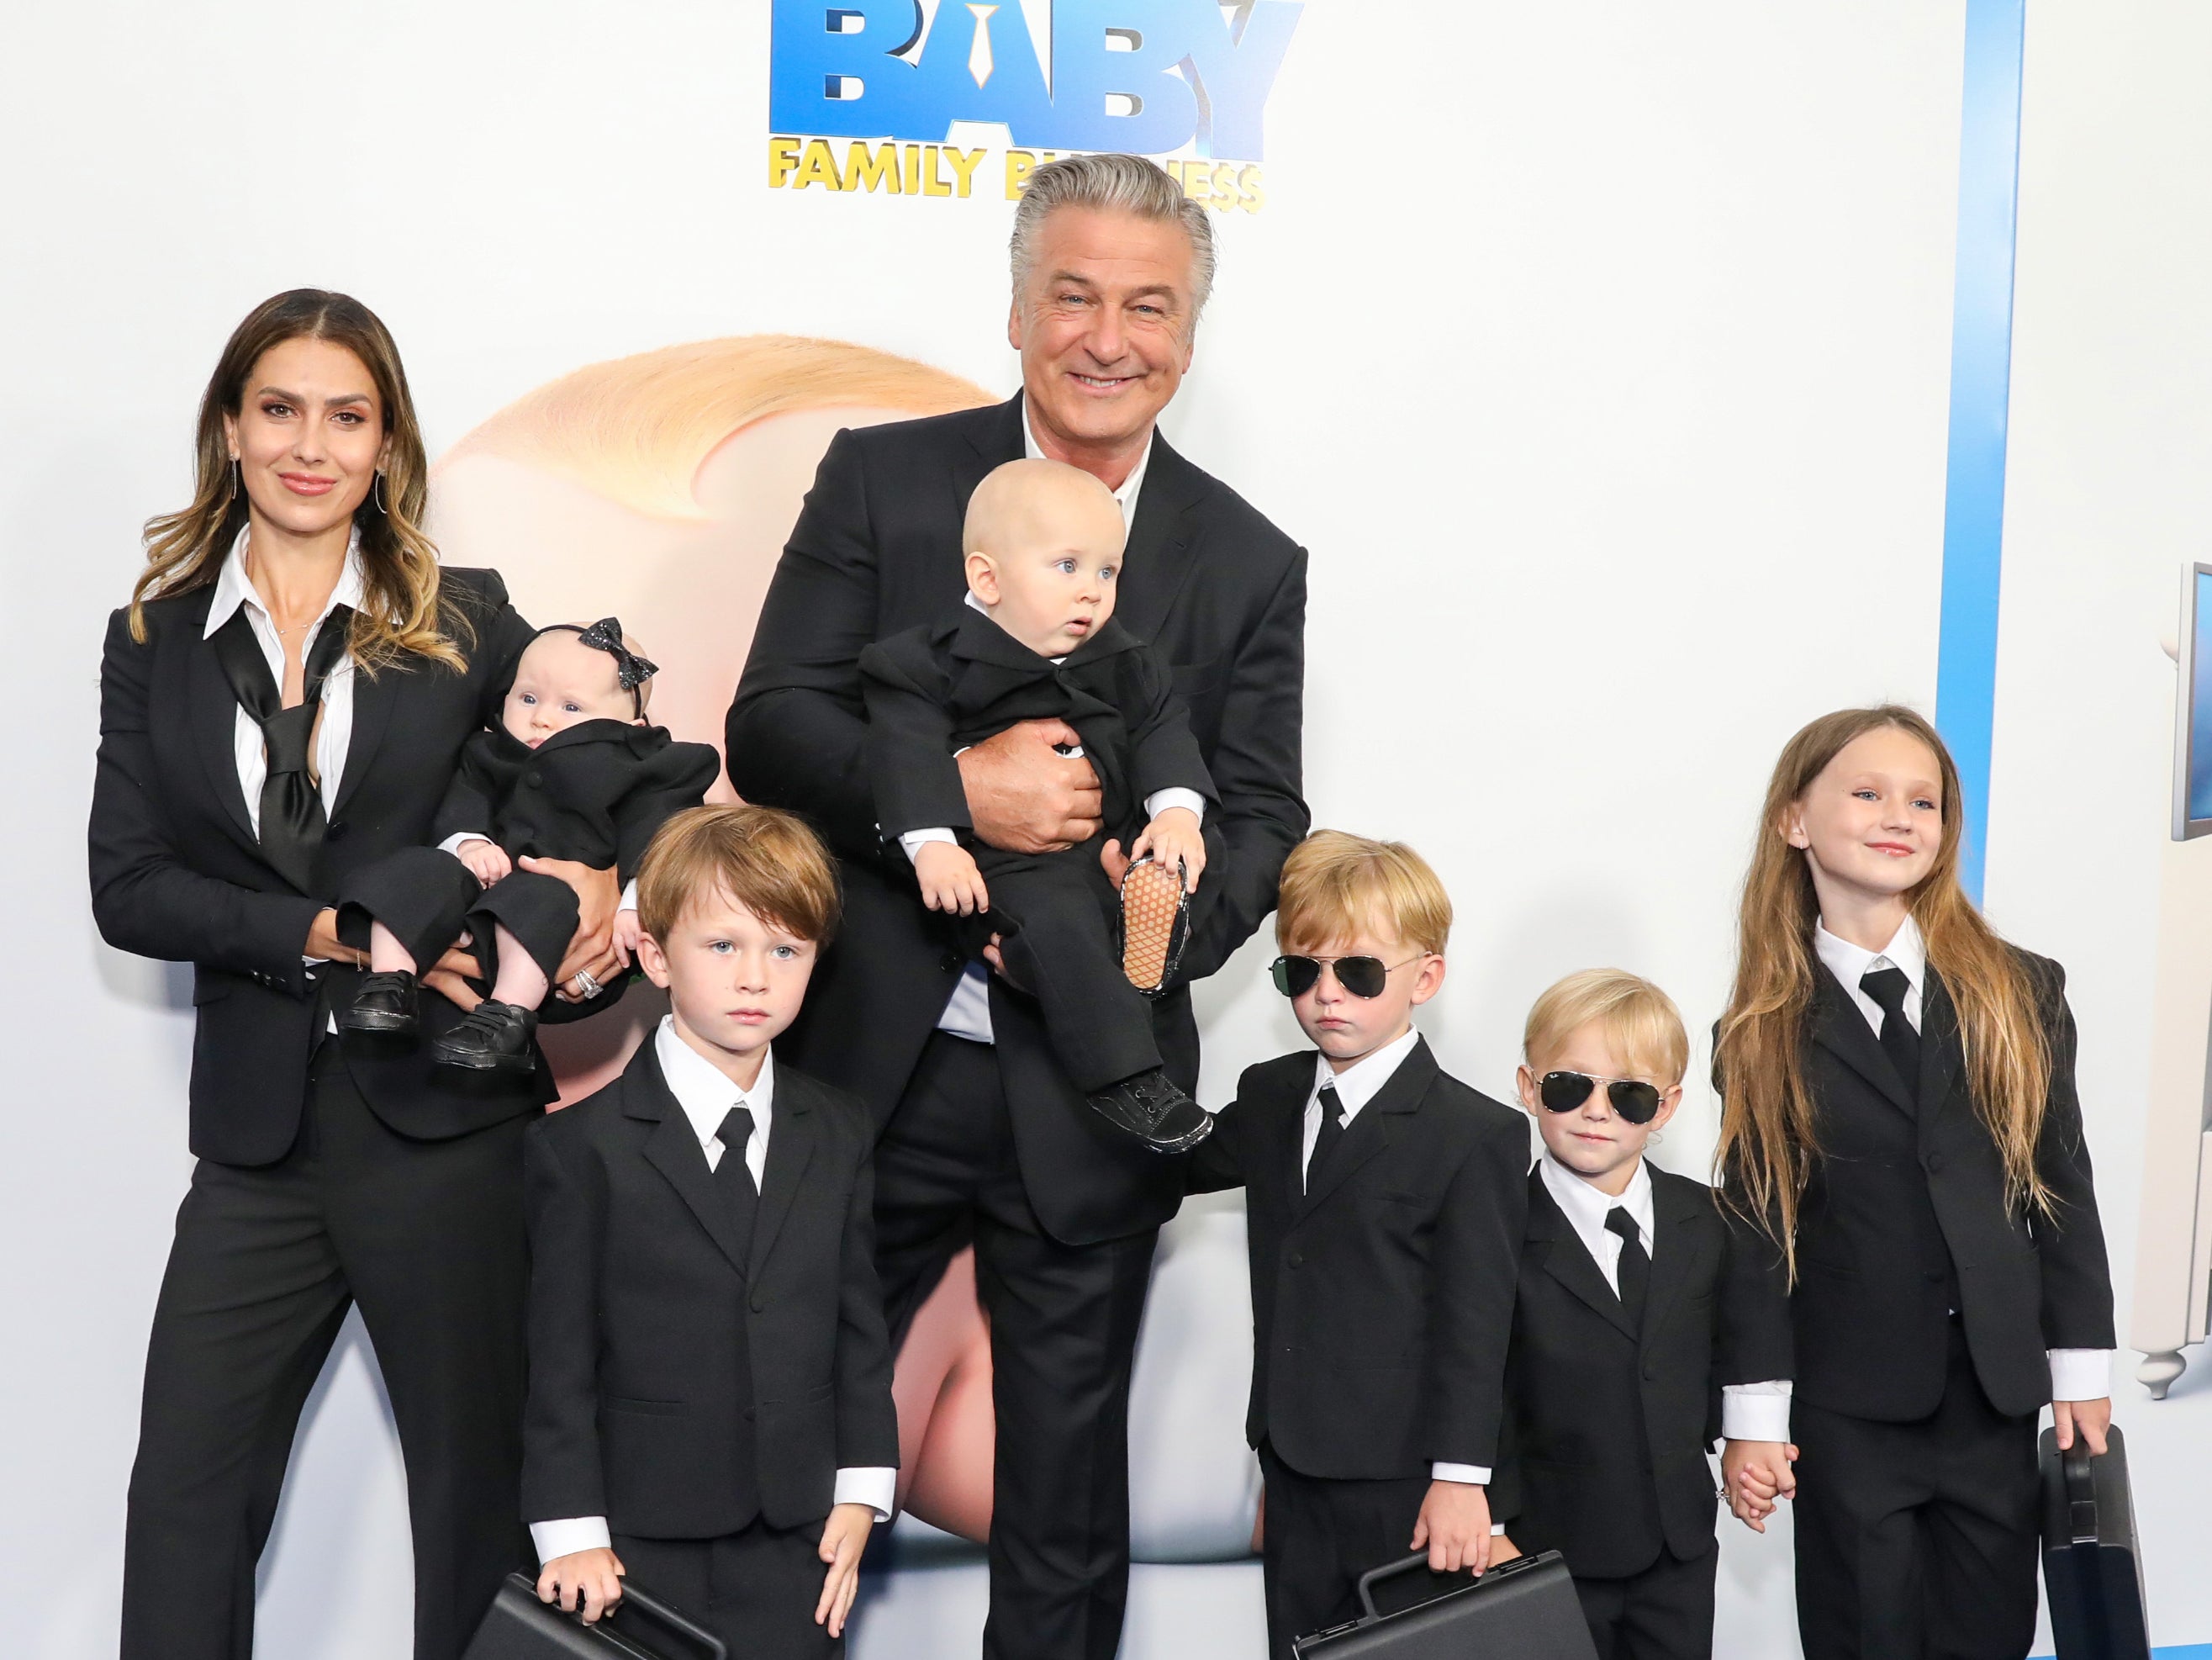 Hilaria and Alec Baldwin with their children